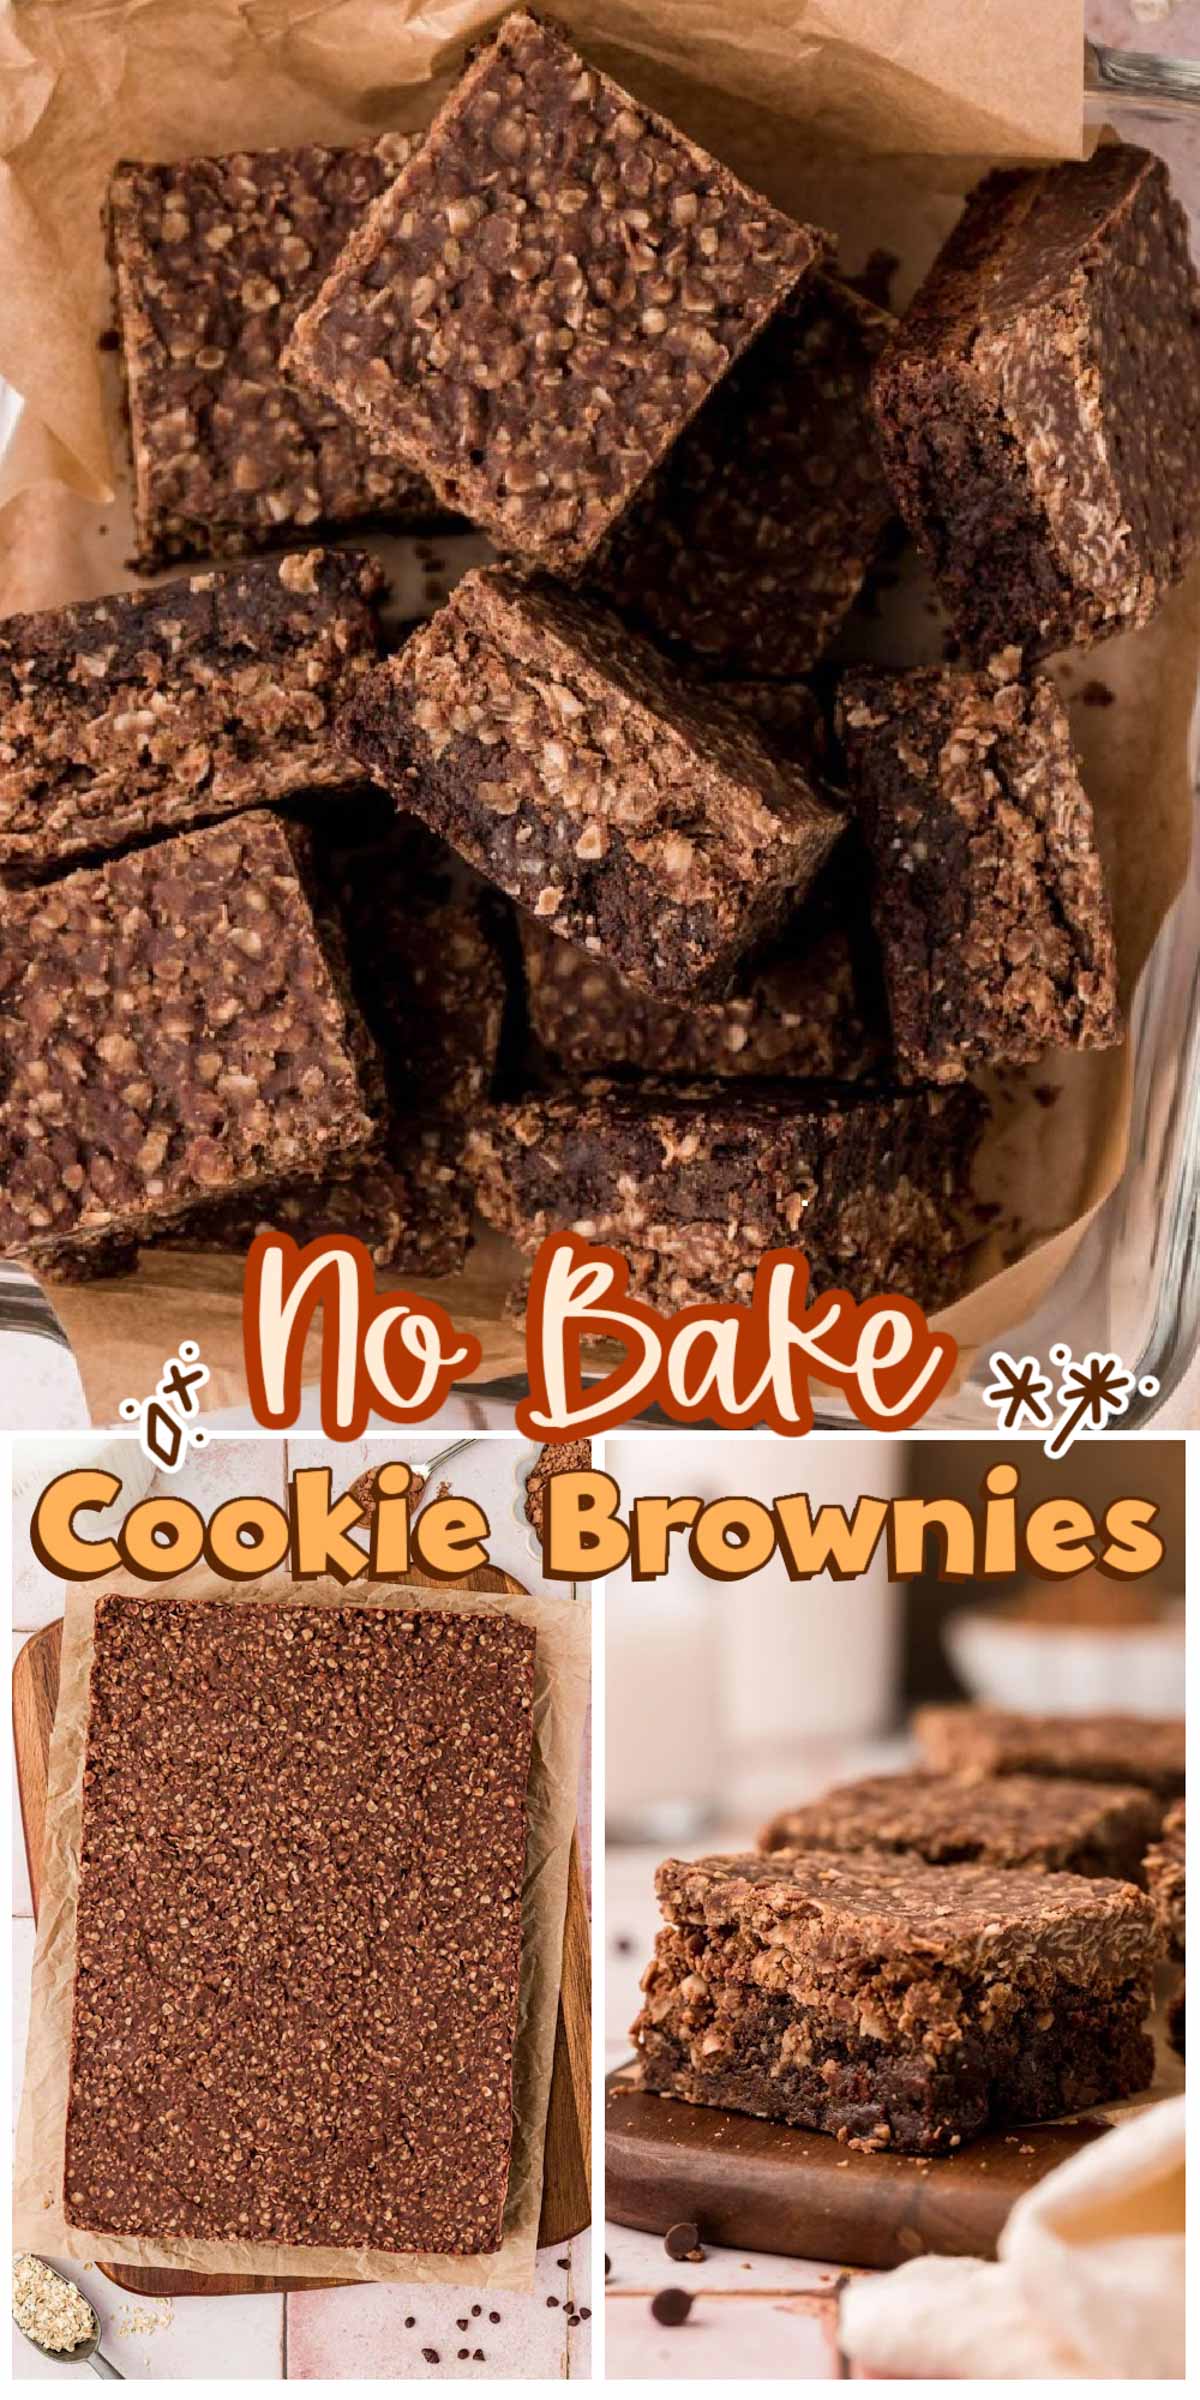 No Bake Cookie Brownies are made with a homemade fudgy brownie layer that's topped with chewy oat based no bake cookies! A great after-dinner treat, potluck dessert, or bake sale contribution! via @sugarandsoulco